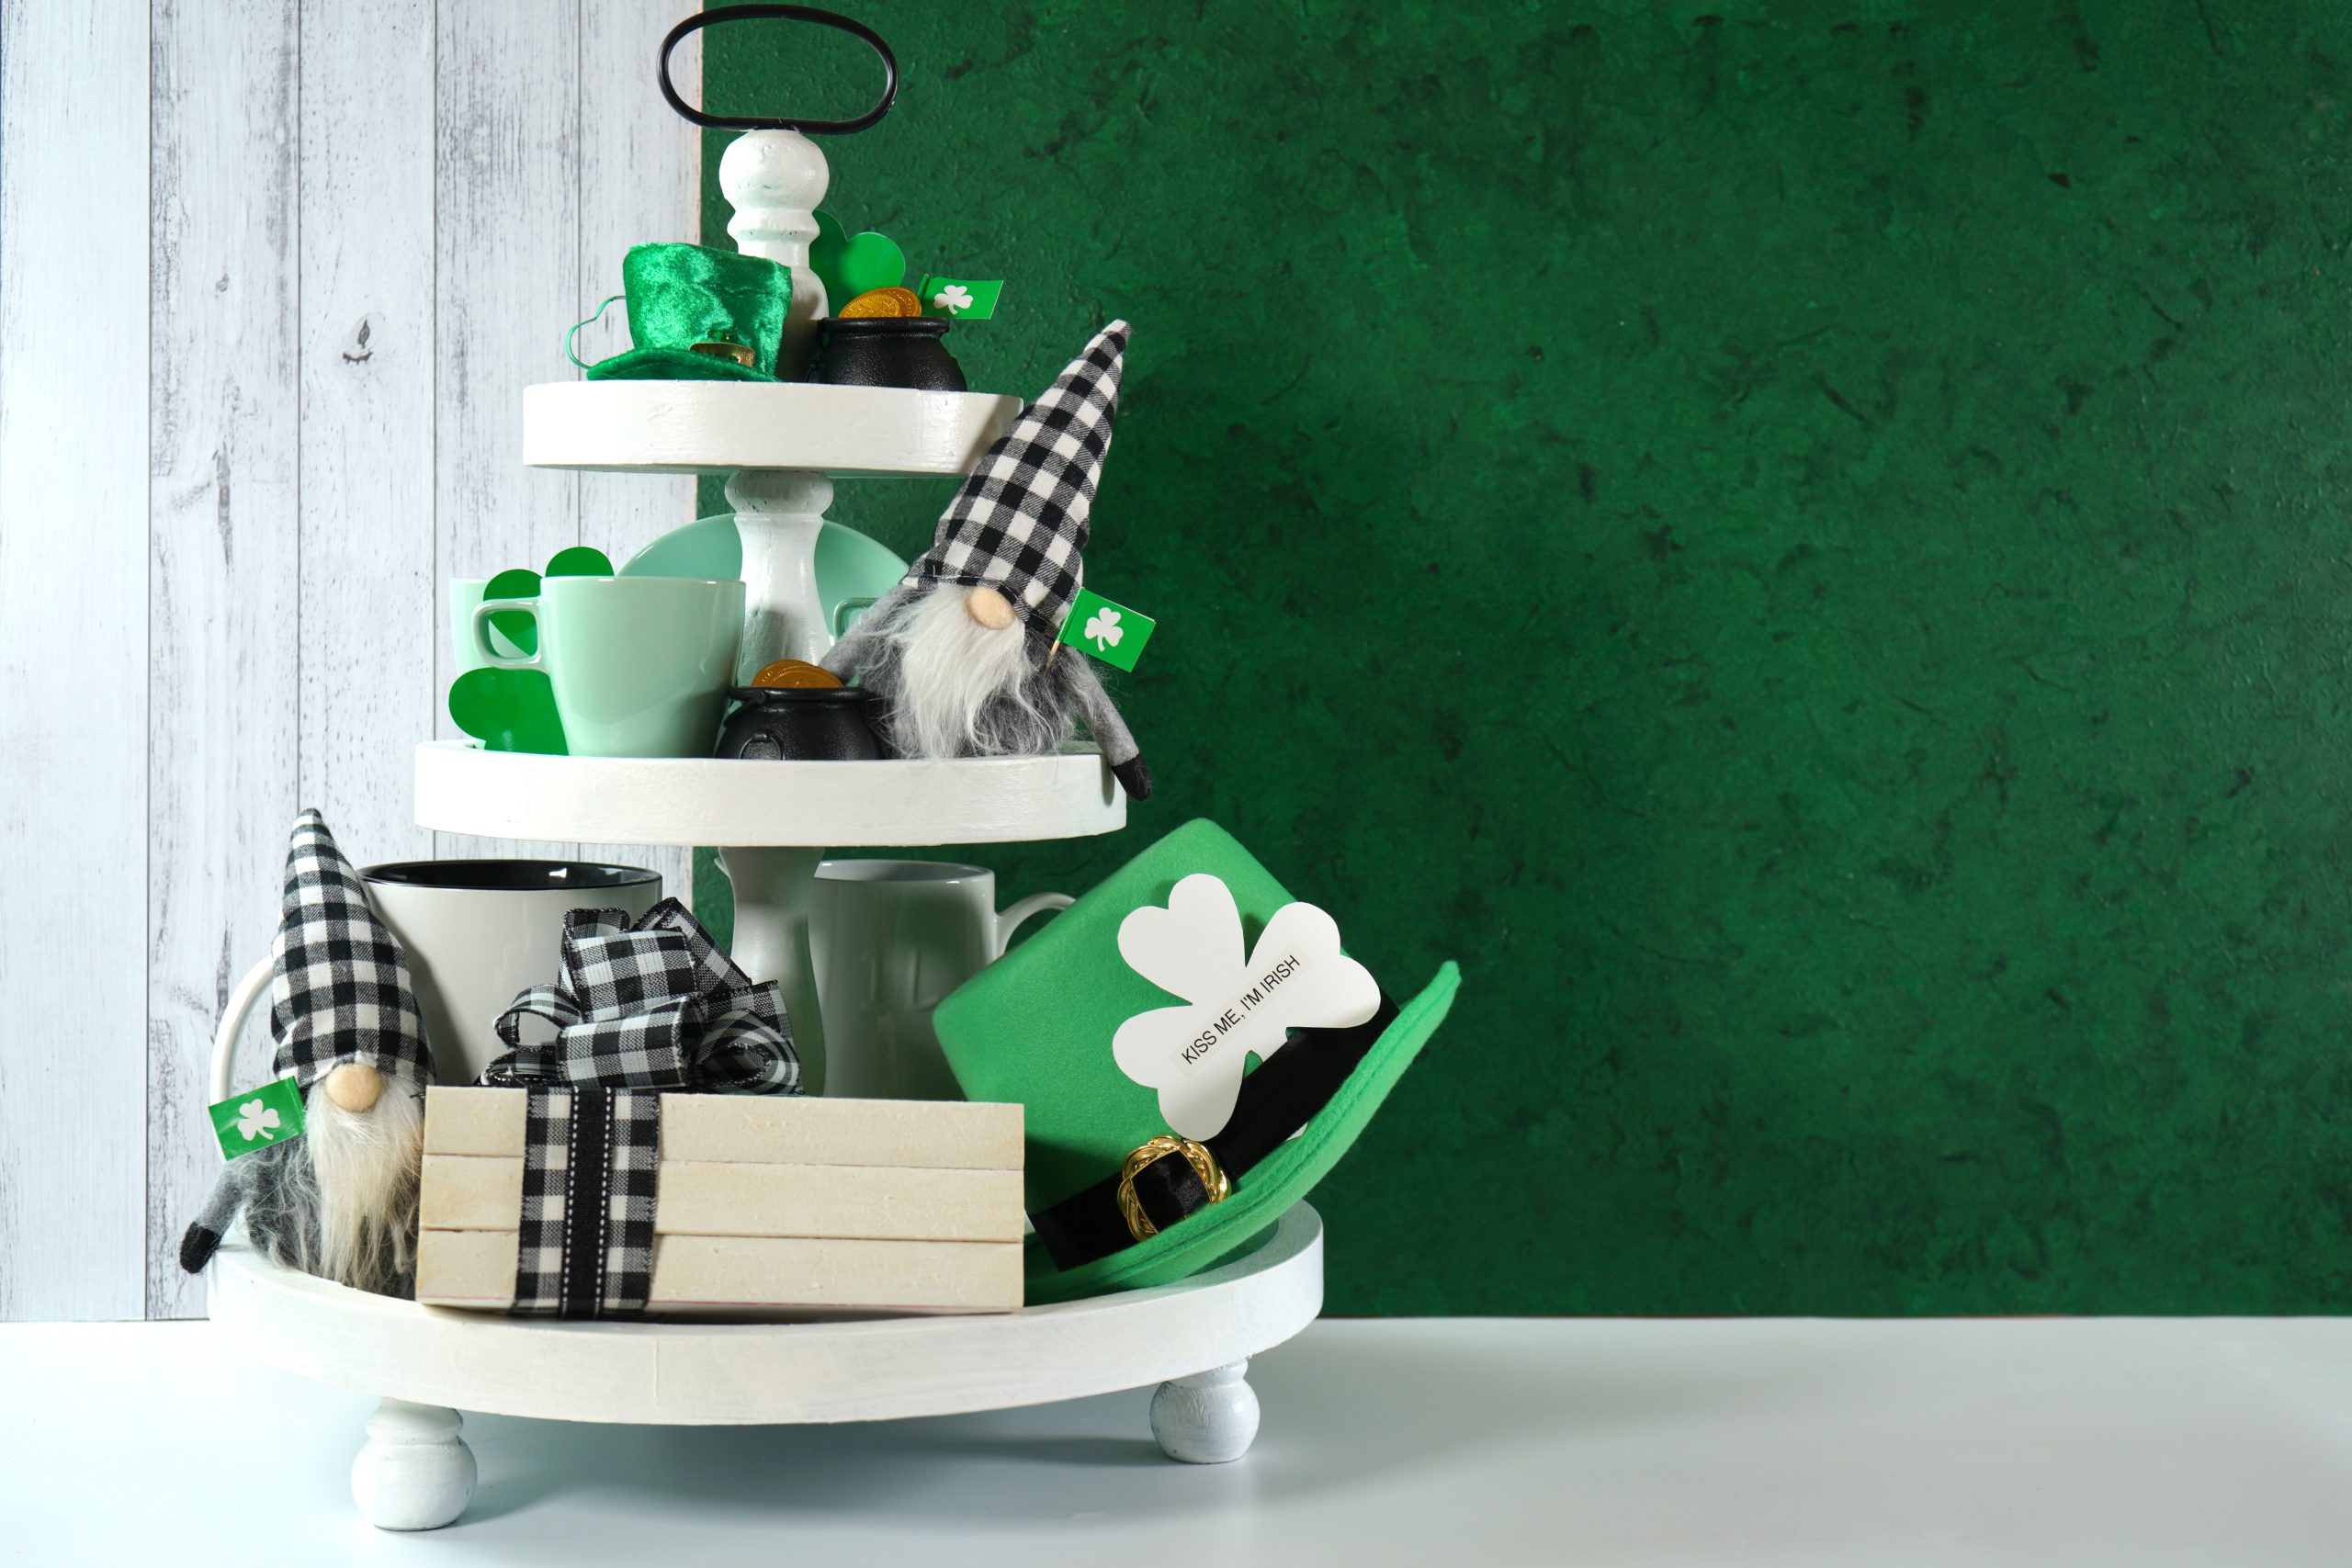 Catch That Leprechaun! 5 Tips for Your St. Patrick’s Day Fun